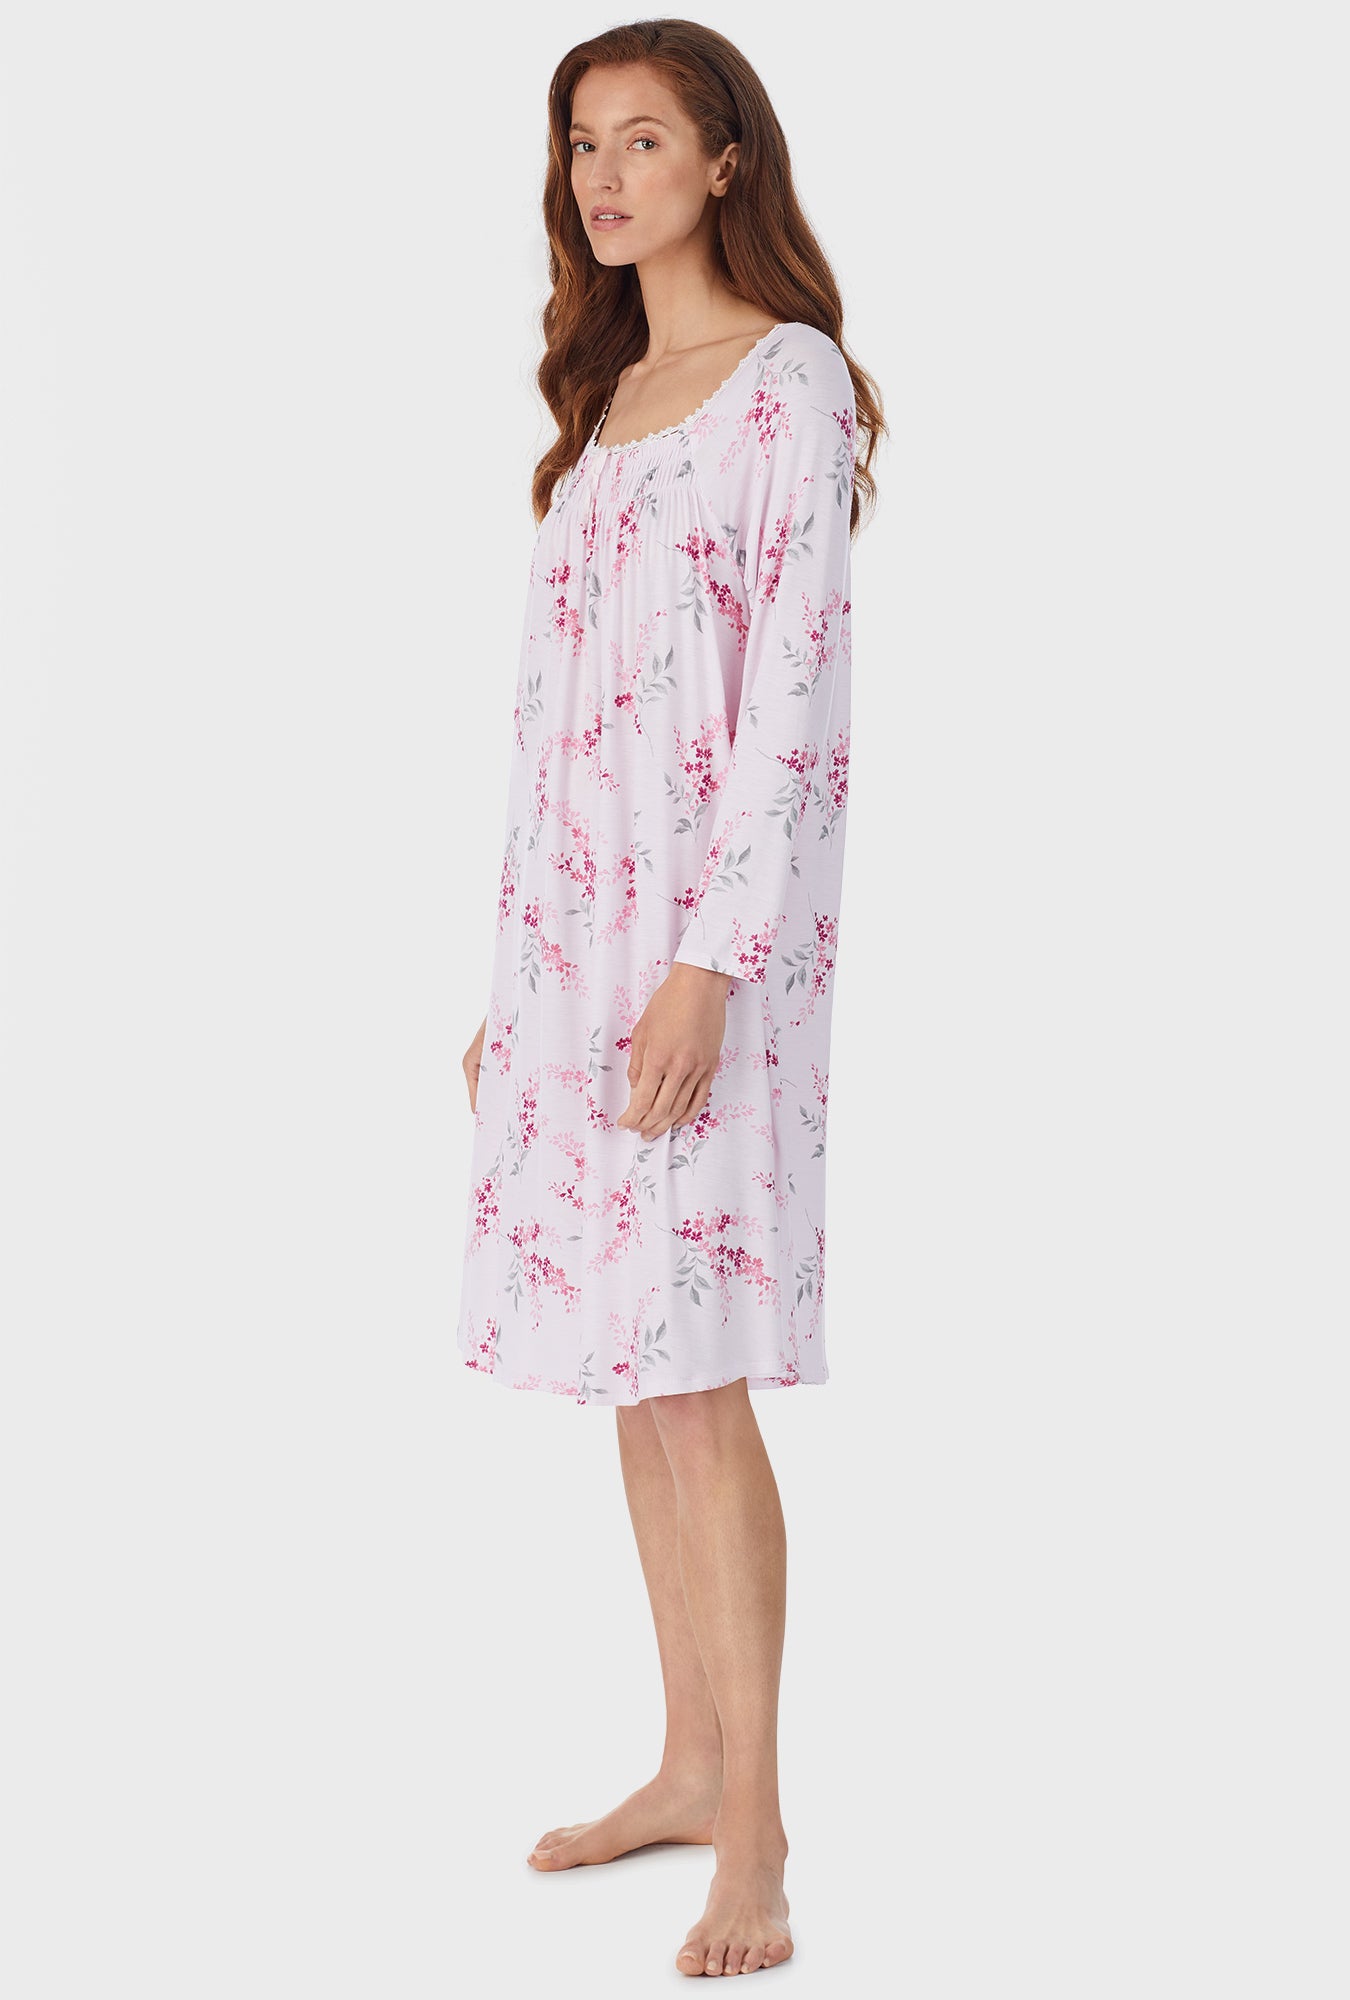 A lady wearing white waltz nightgown with pink floral print